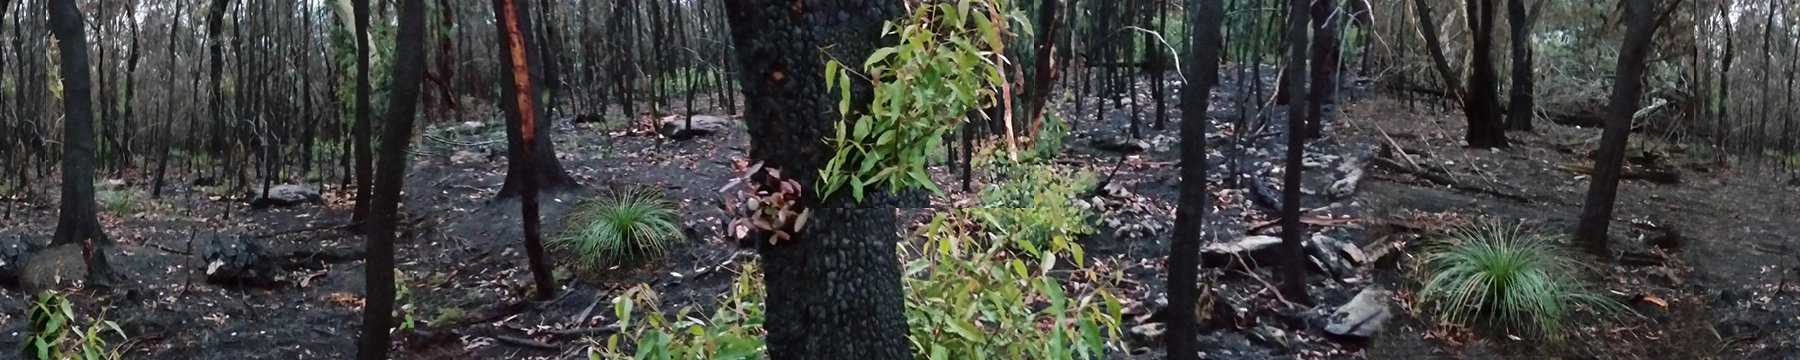 green regrowth on trunks of burnt trees in bushfire damaged area